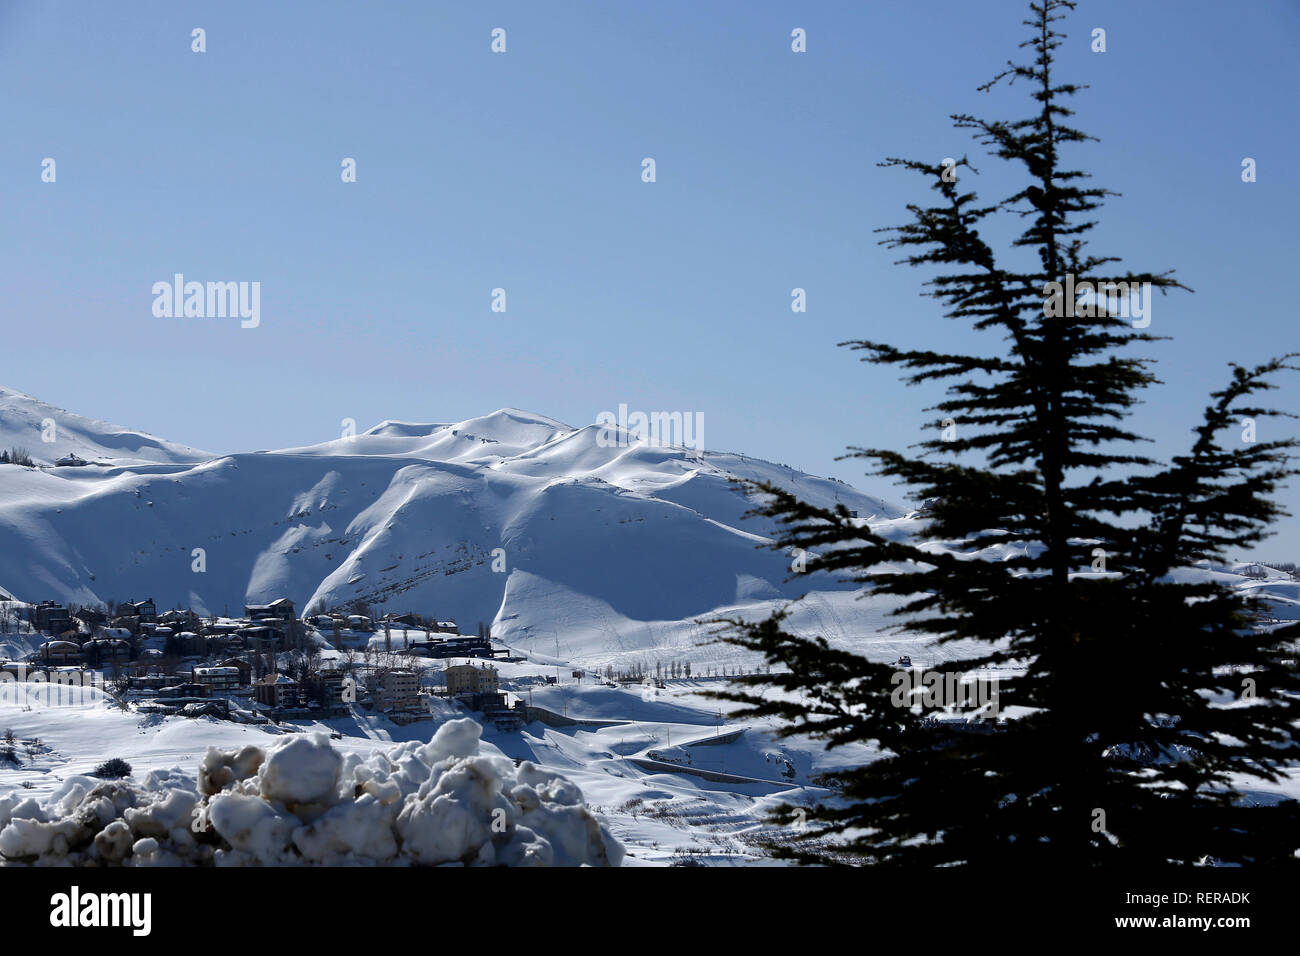 (190122) -- BEIRUT, Jan. 22, 2019 (Xinhua) -- Photo taken on Jan. 22, 2019 shows the snow-covered Faraya, a resort town in Lebanon. The storms hit Lebanon in the past month, bringing snow to several towns and areas lying 700 meters or more above sea level. (Xinhua/Bilal Jawich) Stock Photo